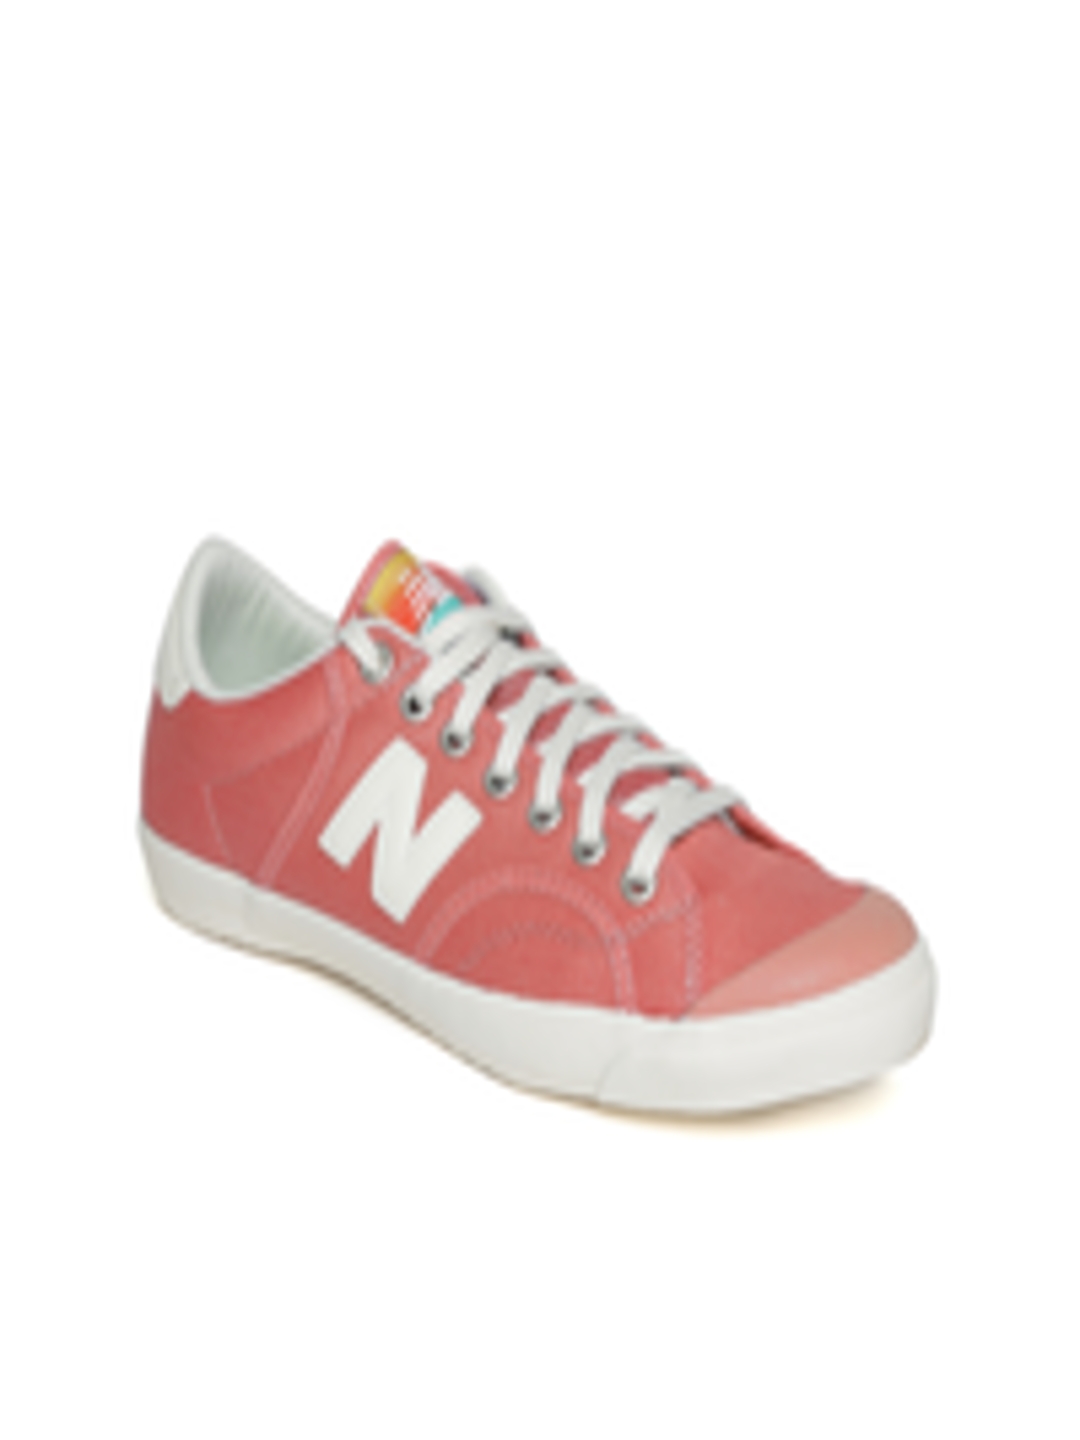 Buy New Balance Women Orange Sneakers Casual Shoes for